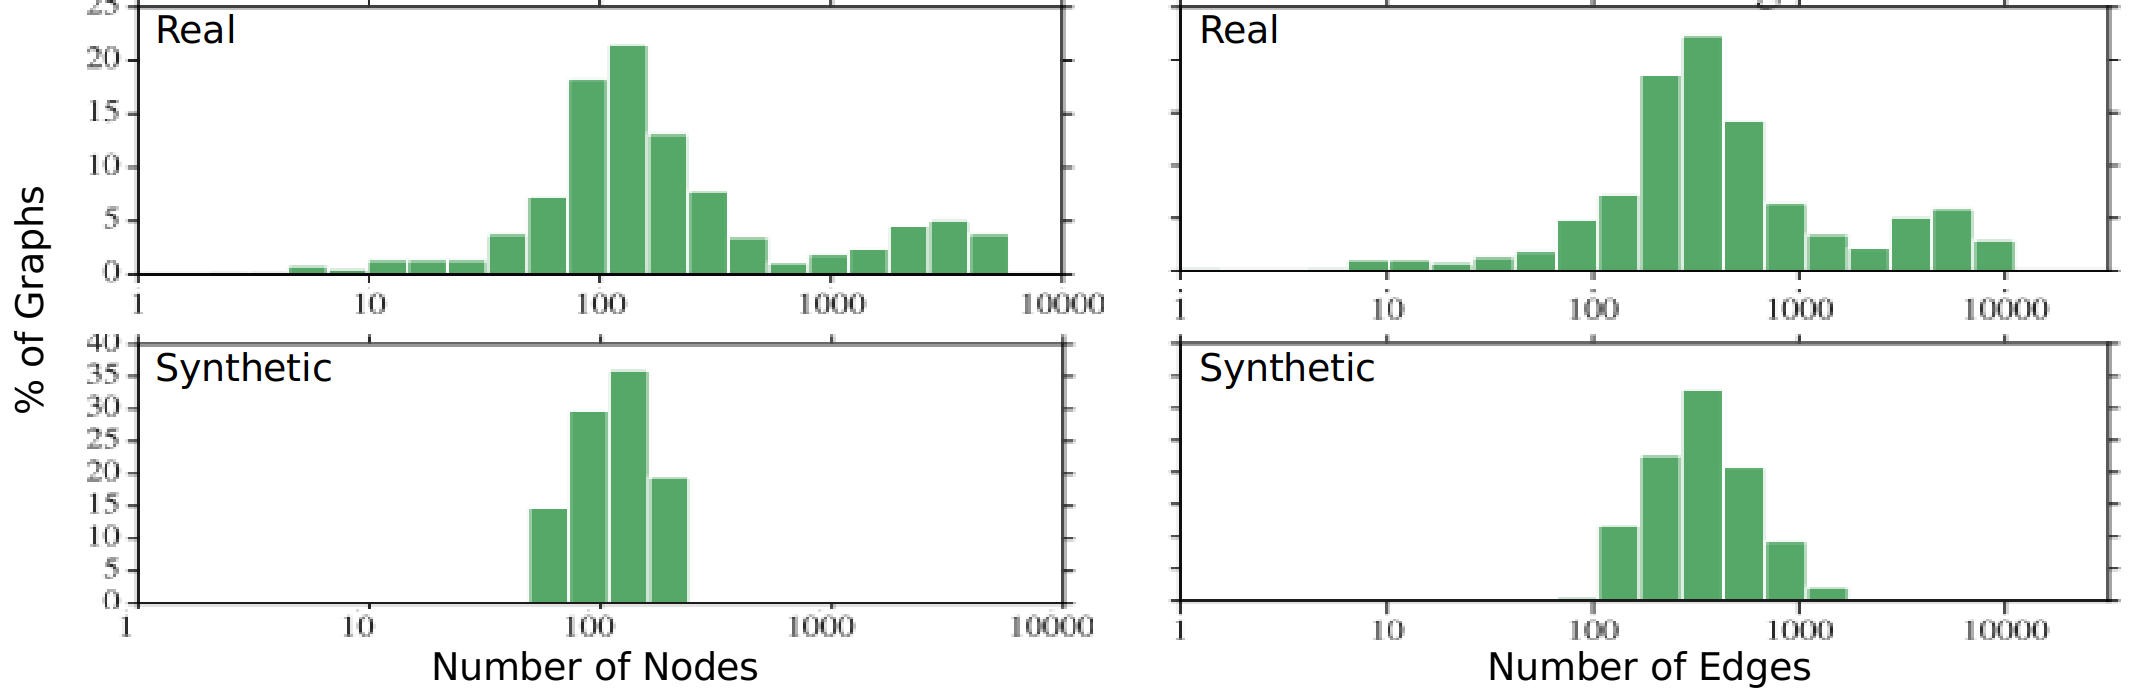 Histogram distribution for the number of nodes (operations) in the real and synthetic TensorFlow job graphs.